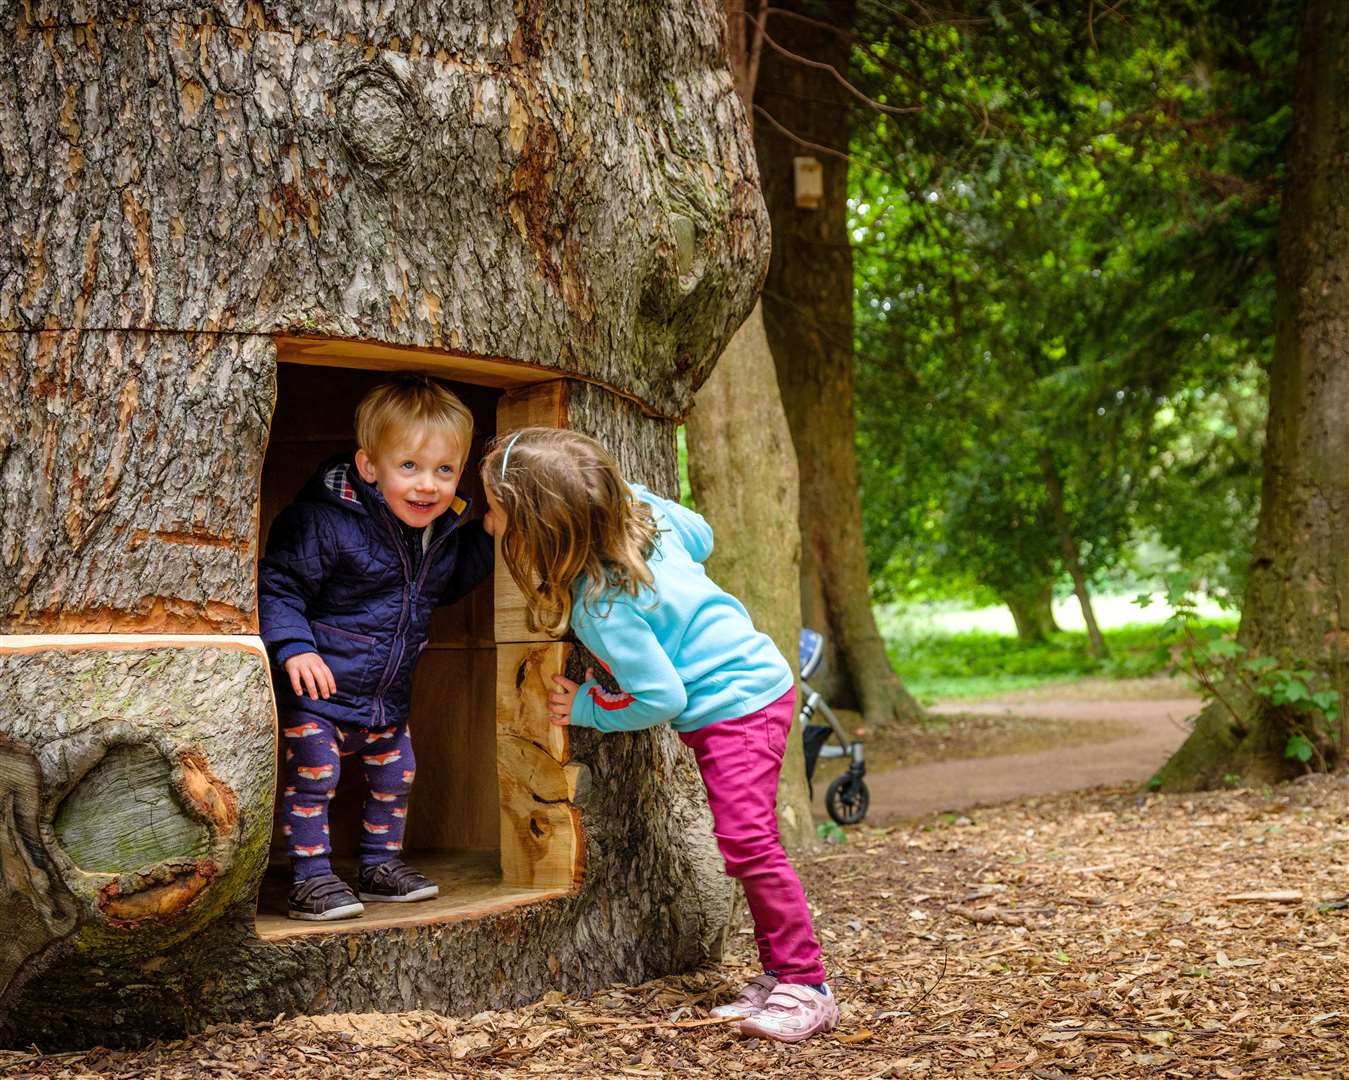 There are lots of new places to play at Walmer Castle